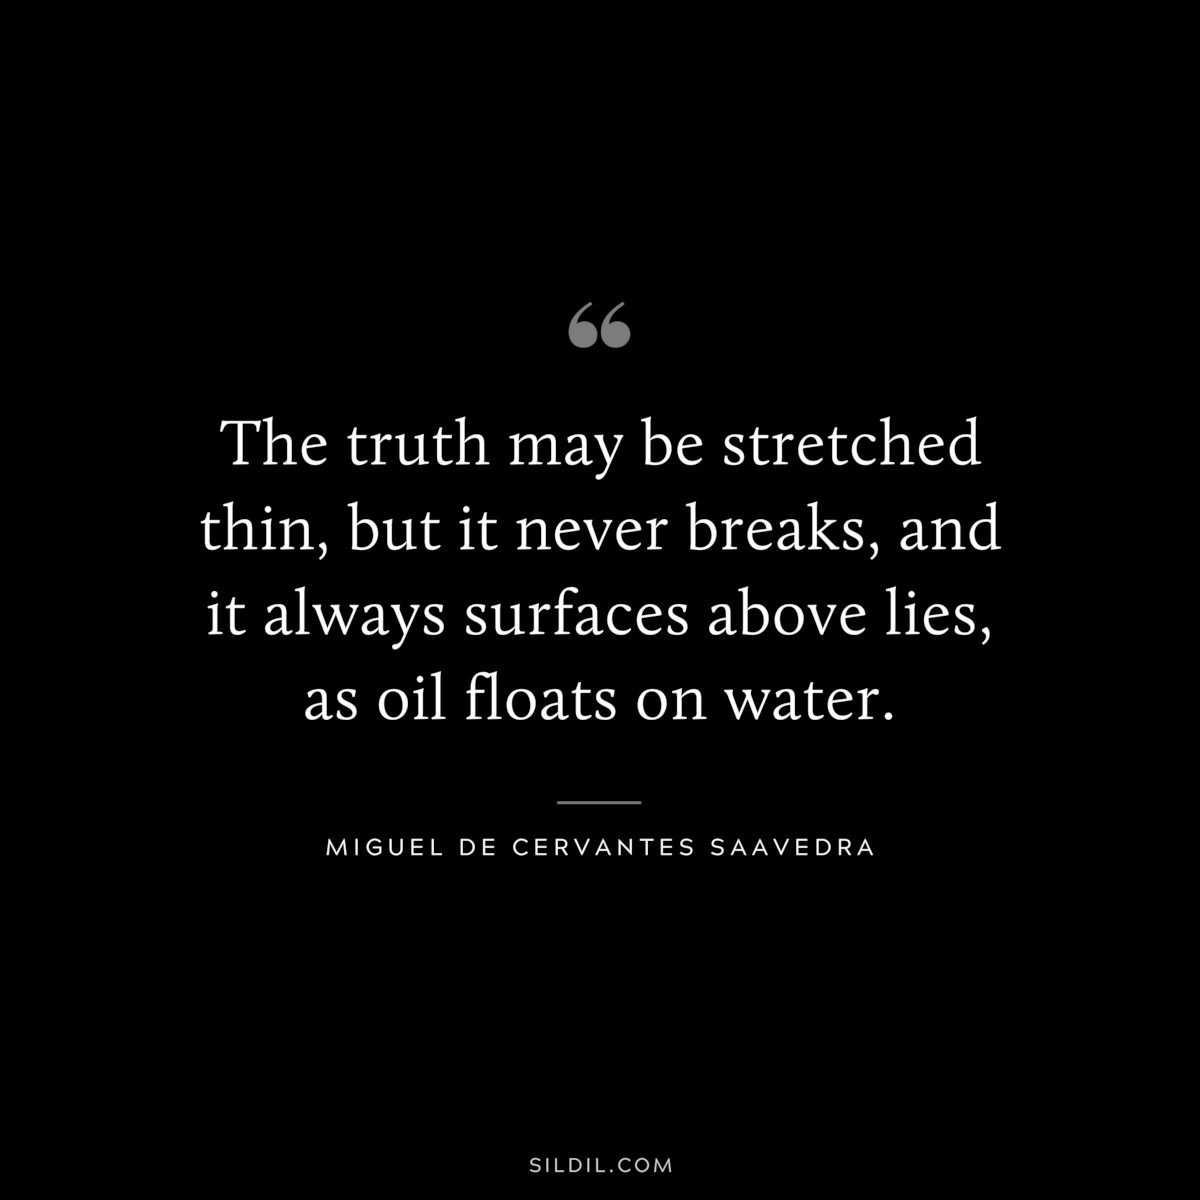 The truth may be stretched thin, but it never breaks, and it always surfaces above lies, as oil floats on water. ― Miguel de Cervantes Saavedra